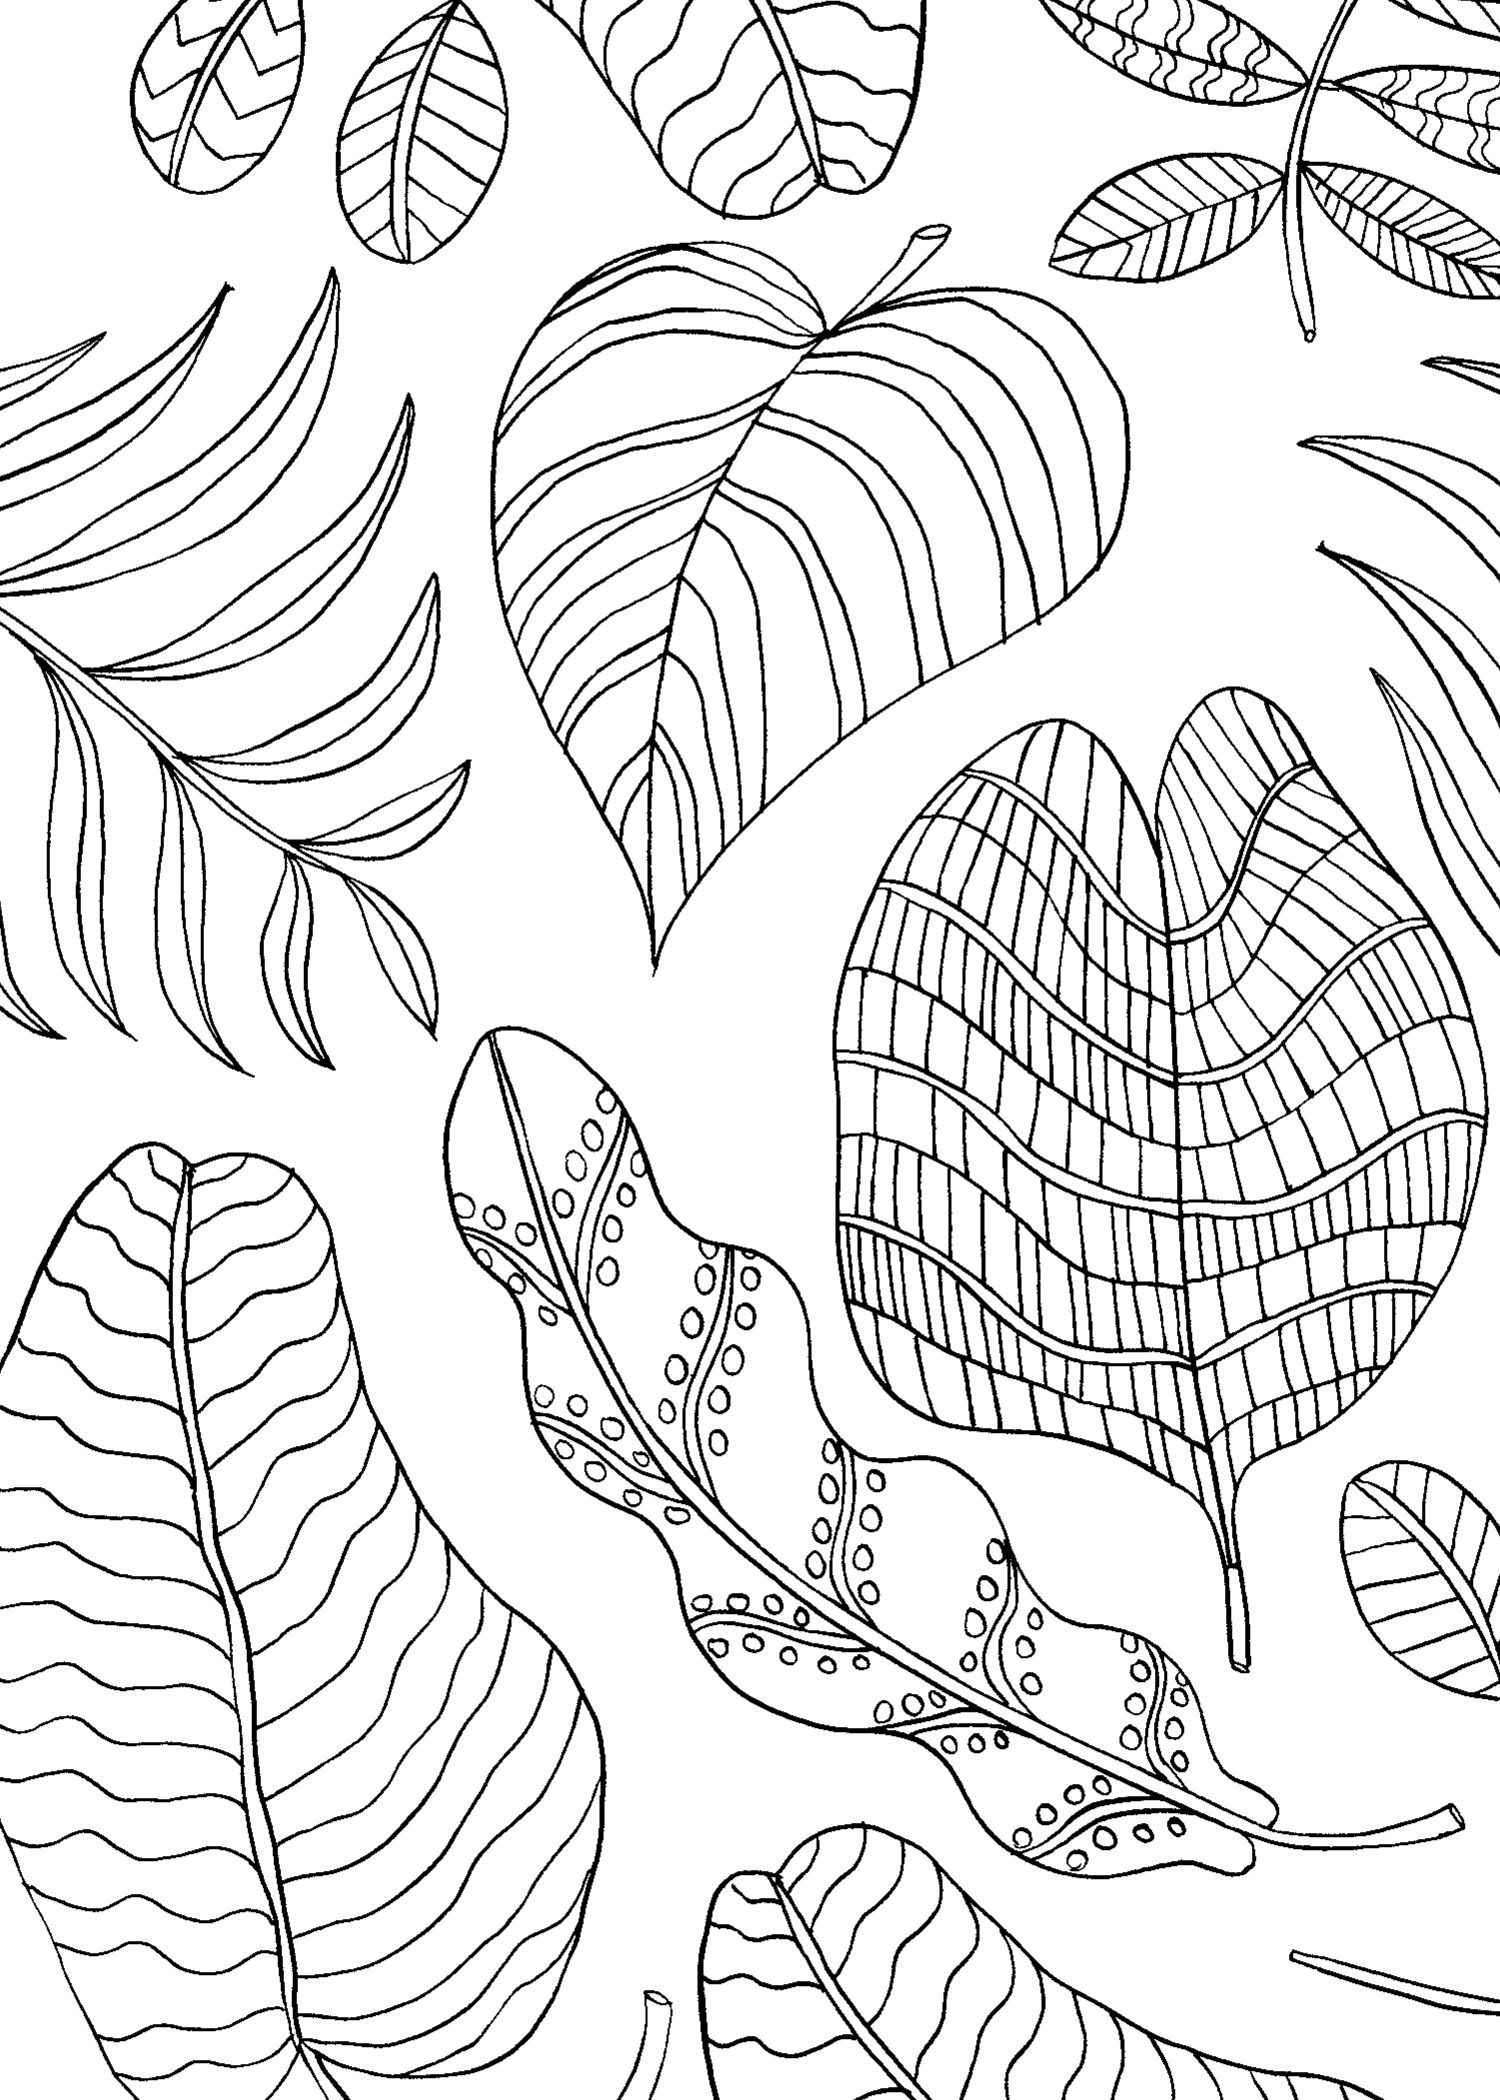 Mindfulness Coloring Pages   Best Coloring Pages For Kids